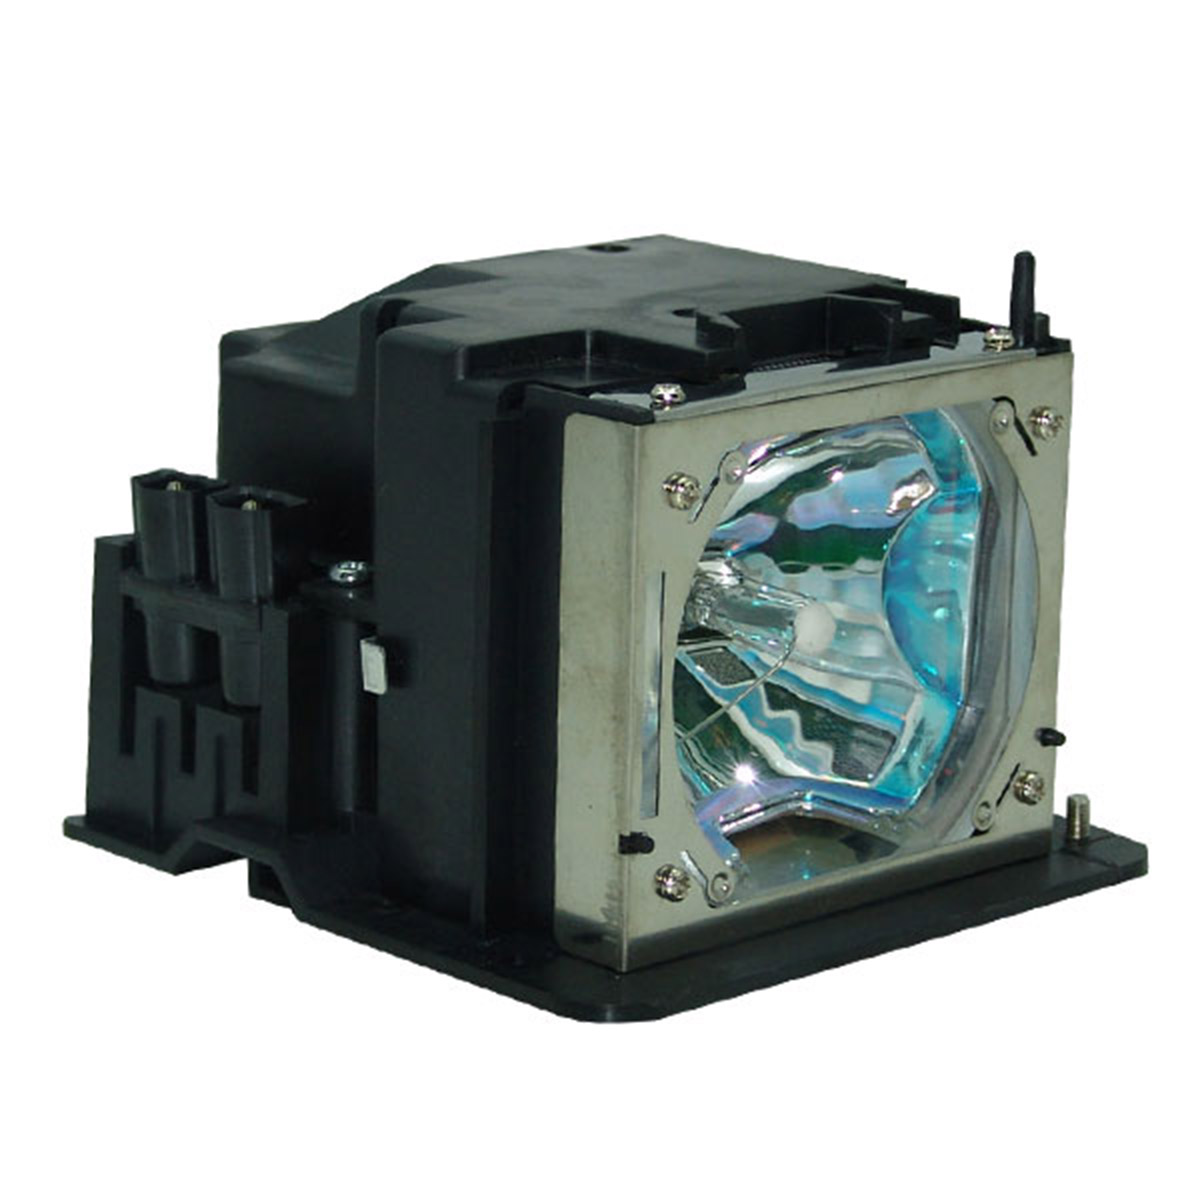 50022792 Lamp & Housing for NEC Projectors - 90 Day Warranty - image 2 of 5